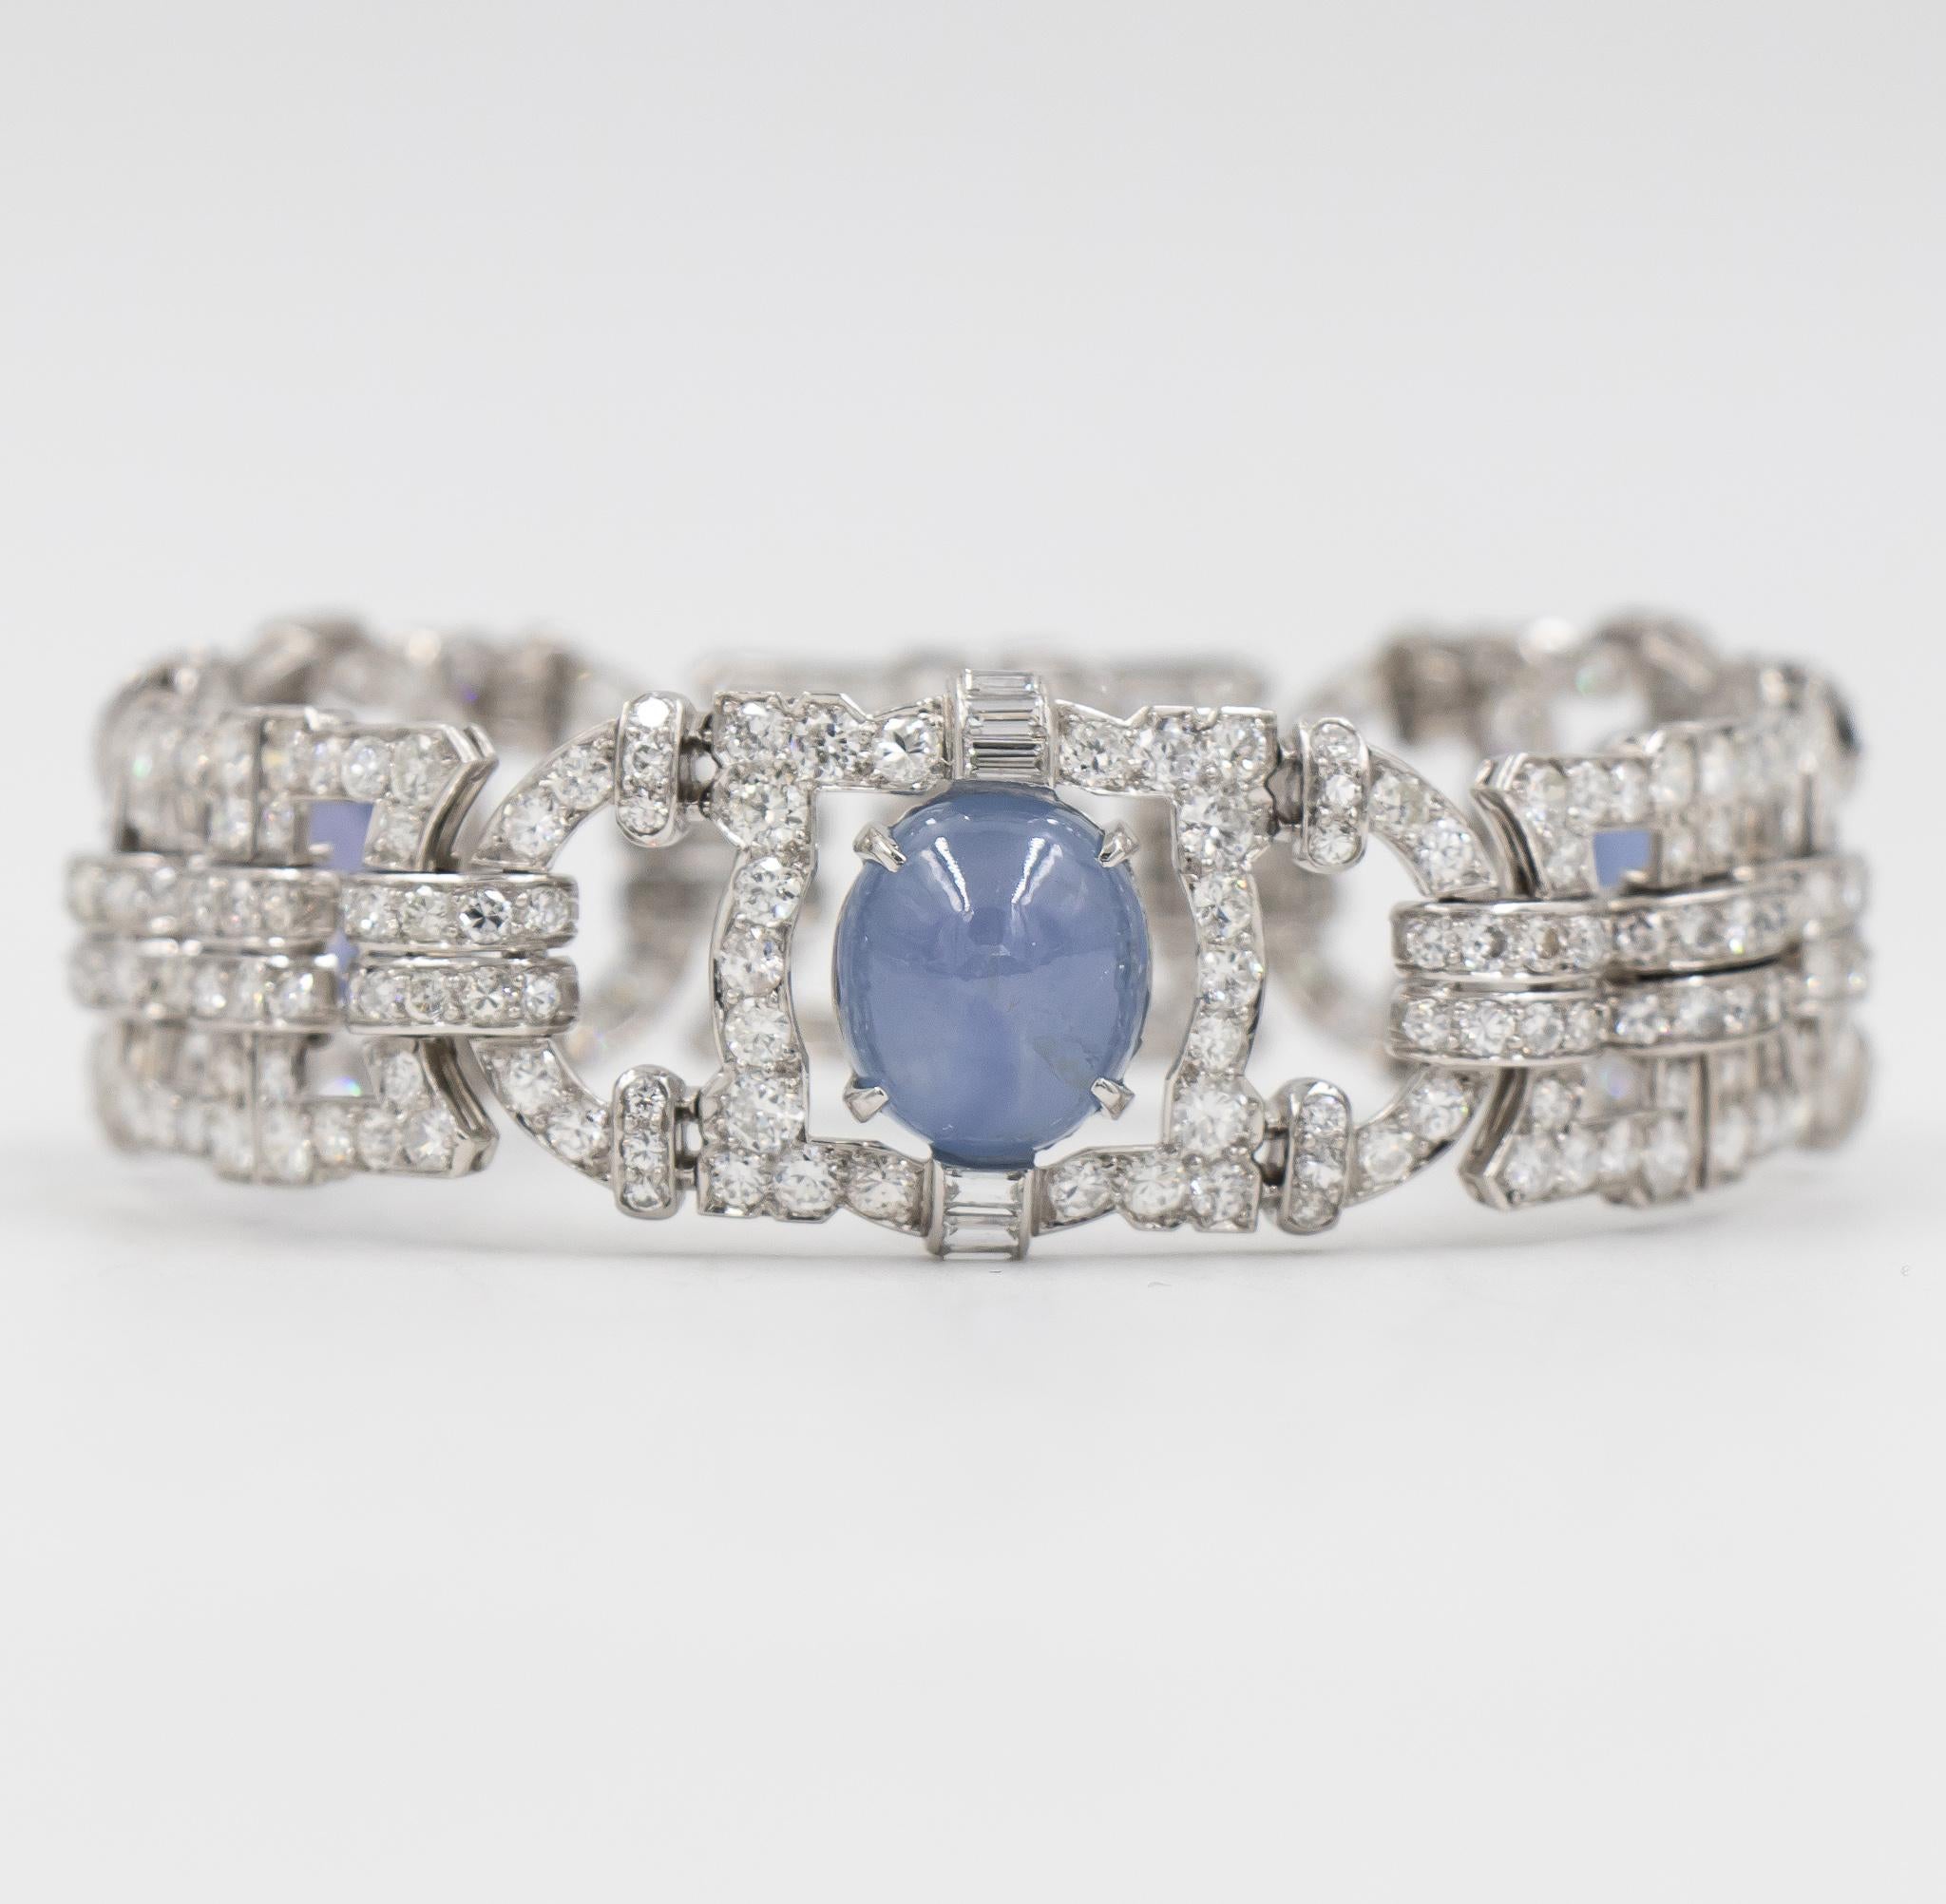 This diamond estate bracelet features three Blue-Gray Star Sapphires set within a bed of high quality diamonds.  The design has three stations with a beautiful art deco pattern.  There is a lovely mix of round brilliant cut & baguette shaped